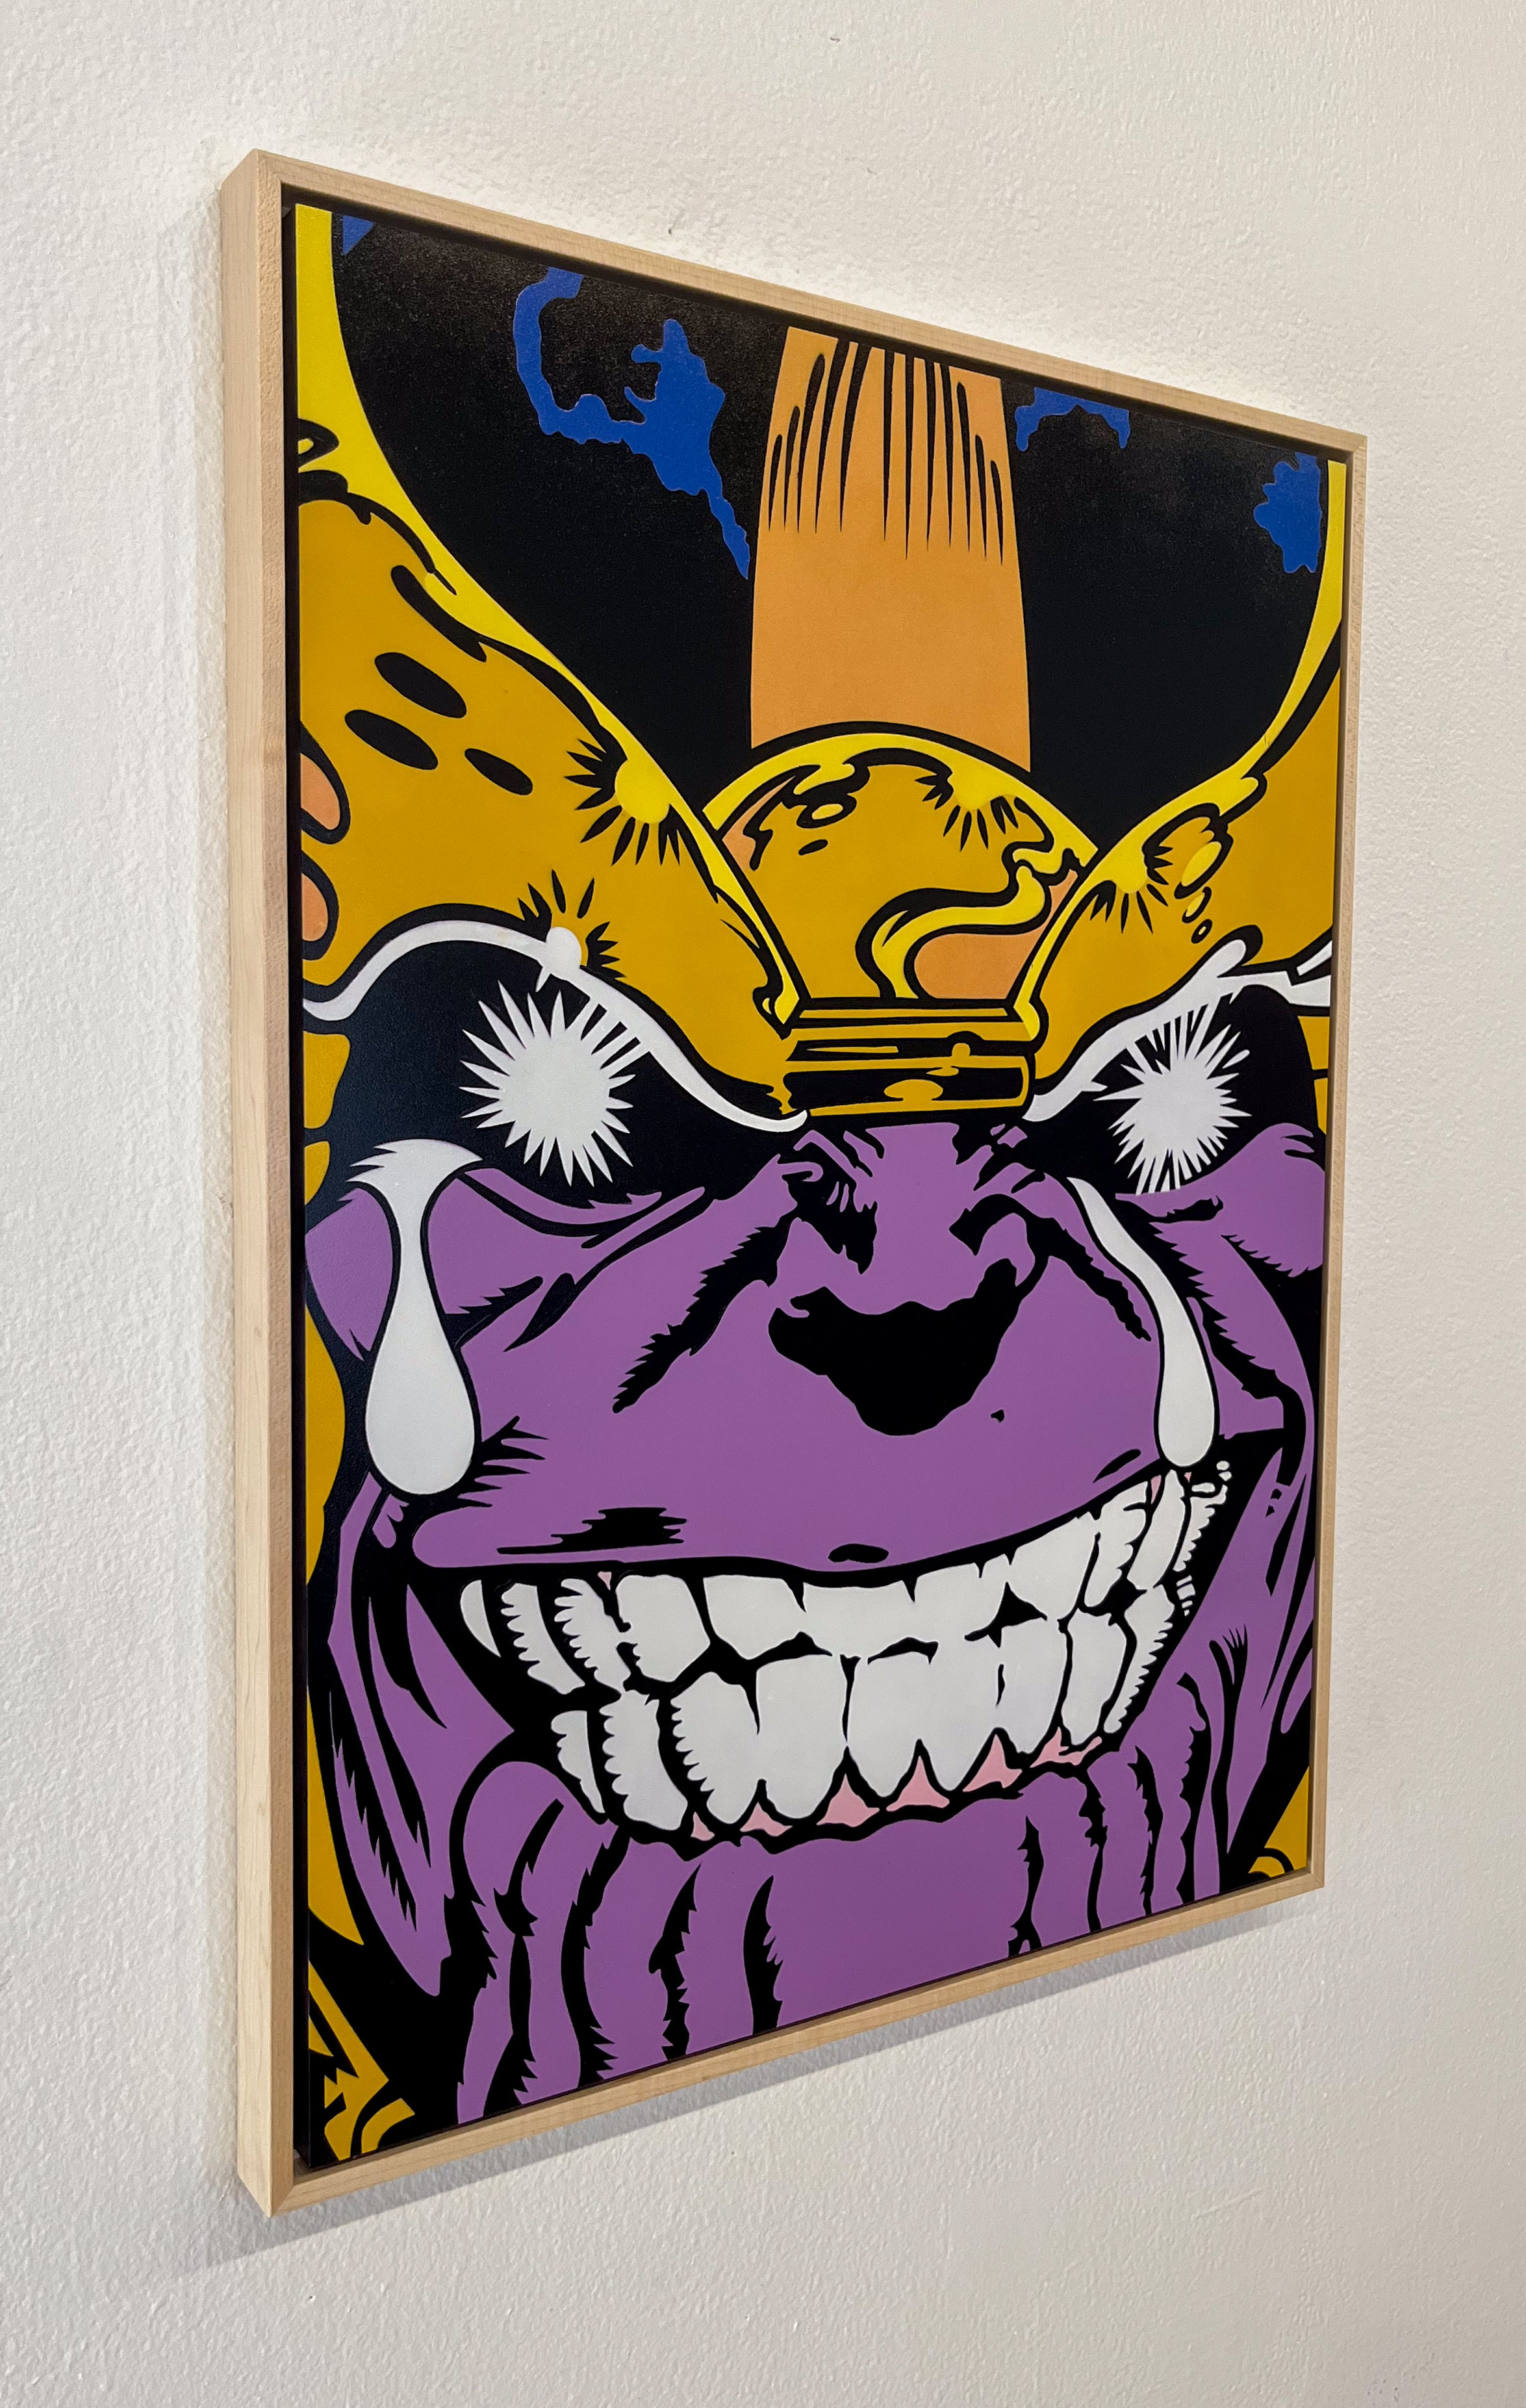 "Thanos' Anguish" by R6D4